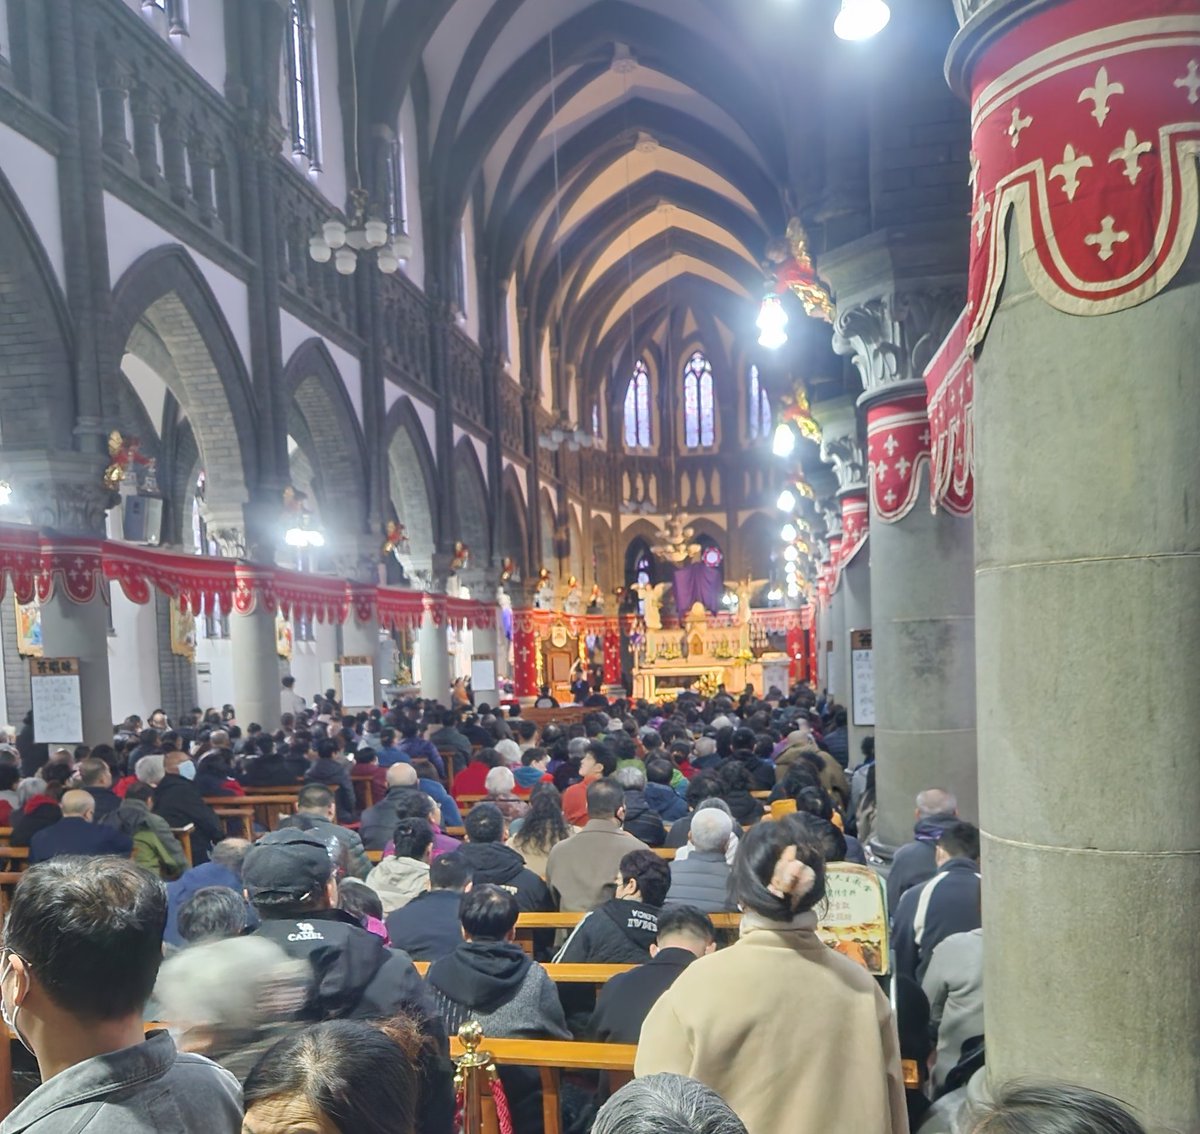 Amazing tonight to be at packed Shenyang Catholic church for the Easter Vigil service... #EasterVigil #Easter #EasterSunday #China